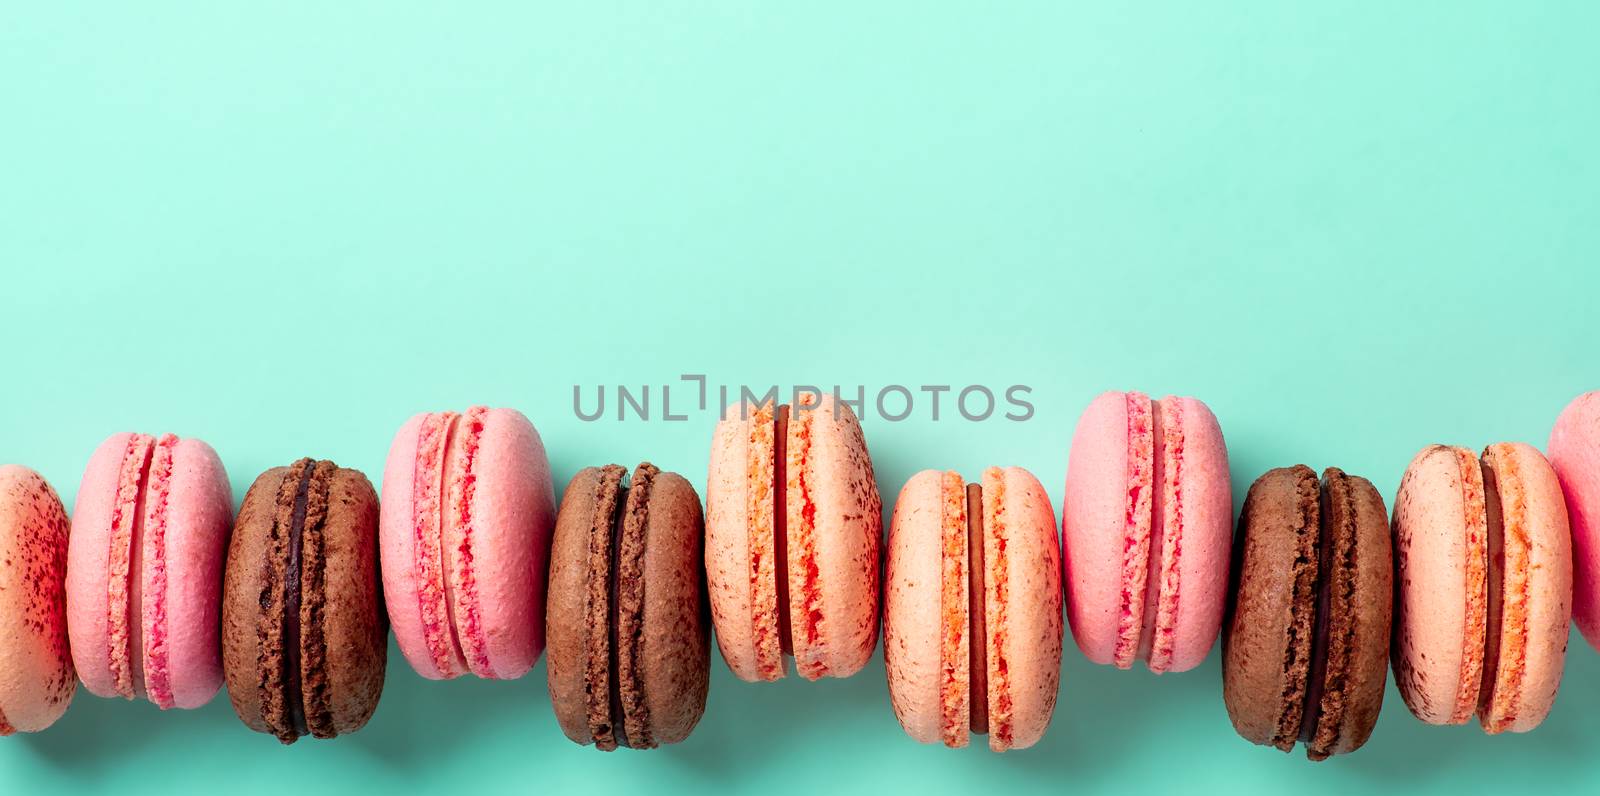 Macarons banner with copy space. Colorful french macarons or macaroons on blue turquoise background. Top view or flat lay